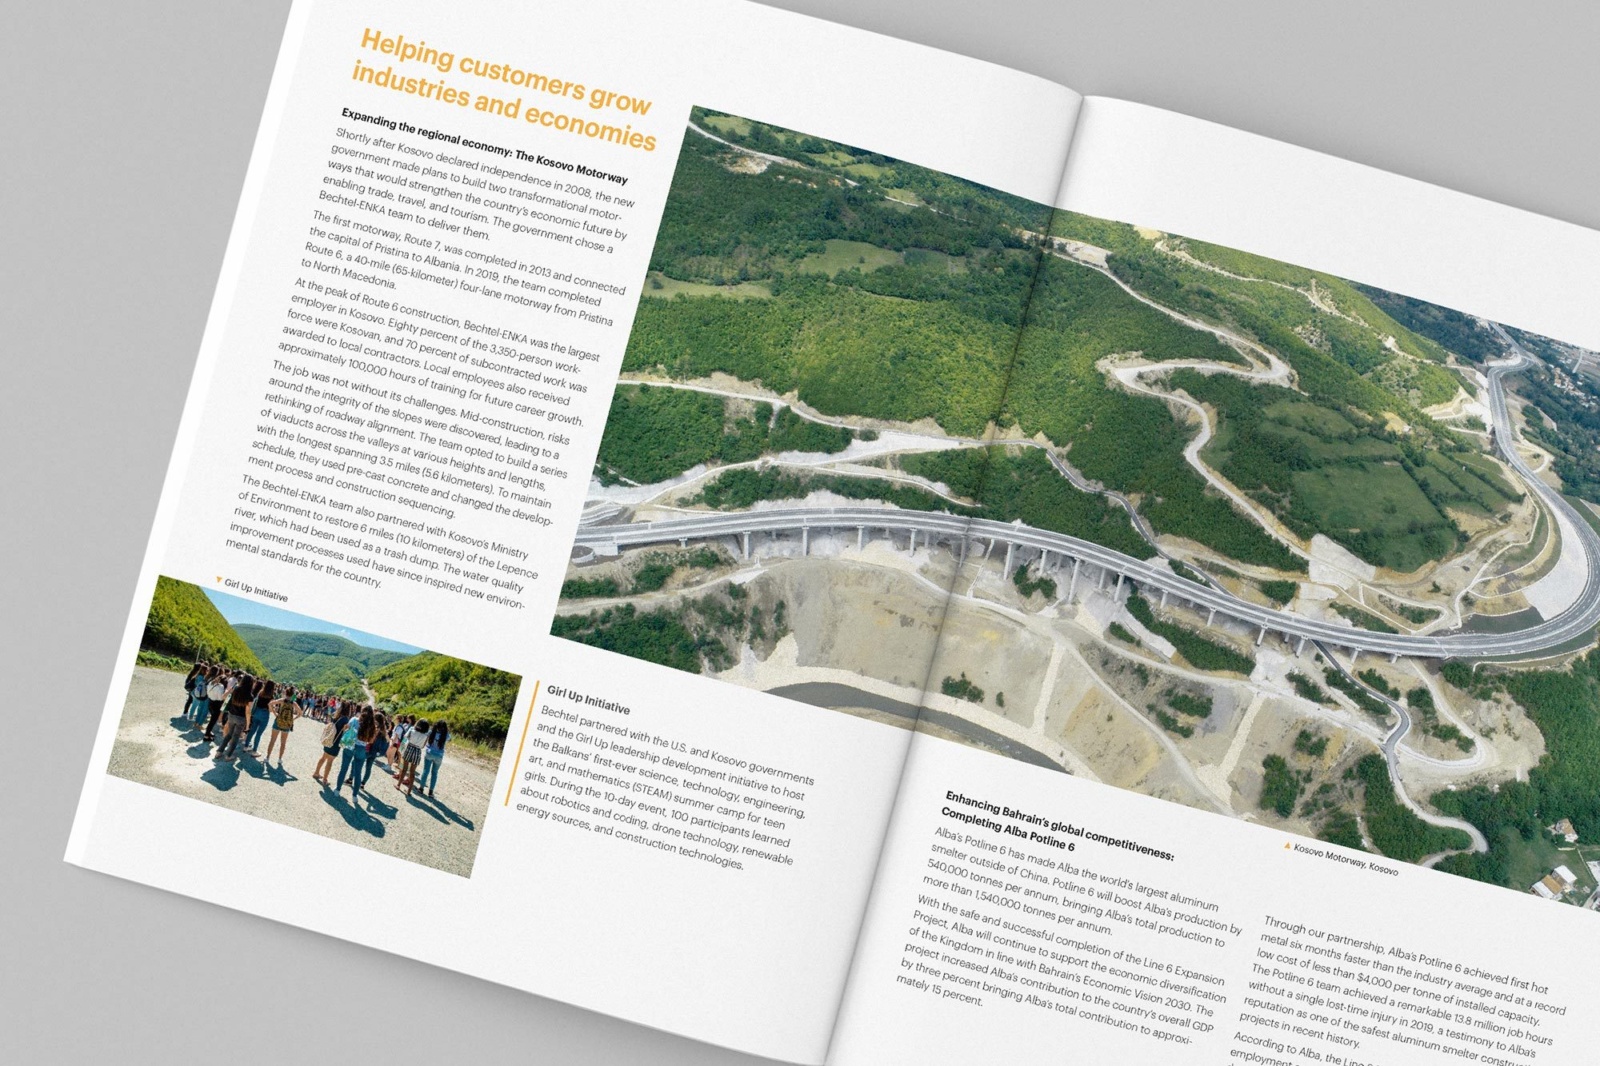 Bechtel annual report design spread, titled "helping customers grow industries and economies" paired with motorway photograph